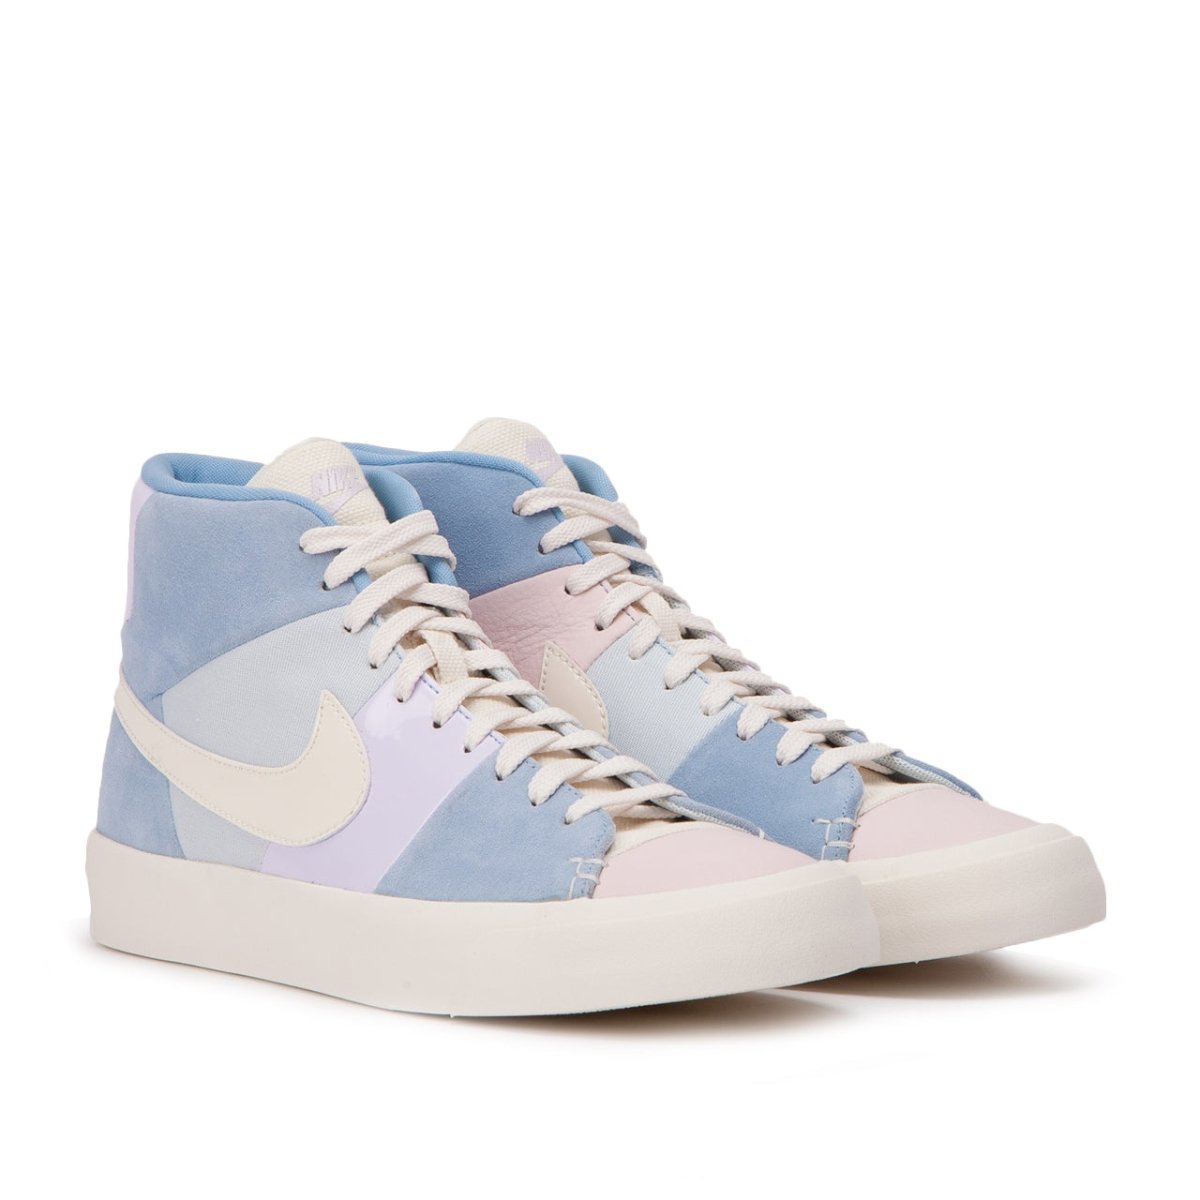 Nike Royal Easter QS Pink / Sail / Ice Blue) AO2368-600 – Allike Store